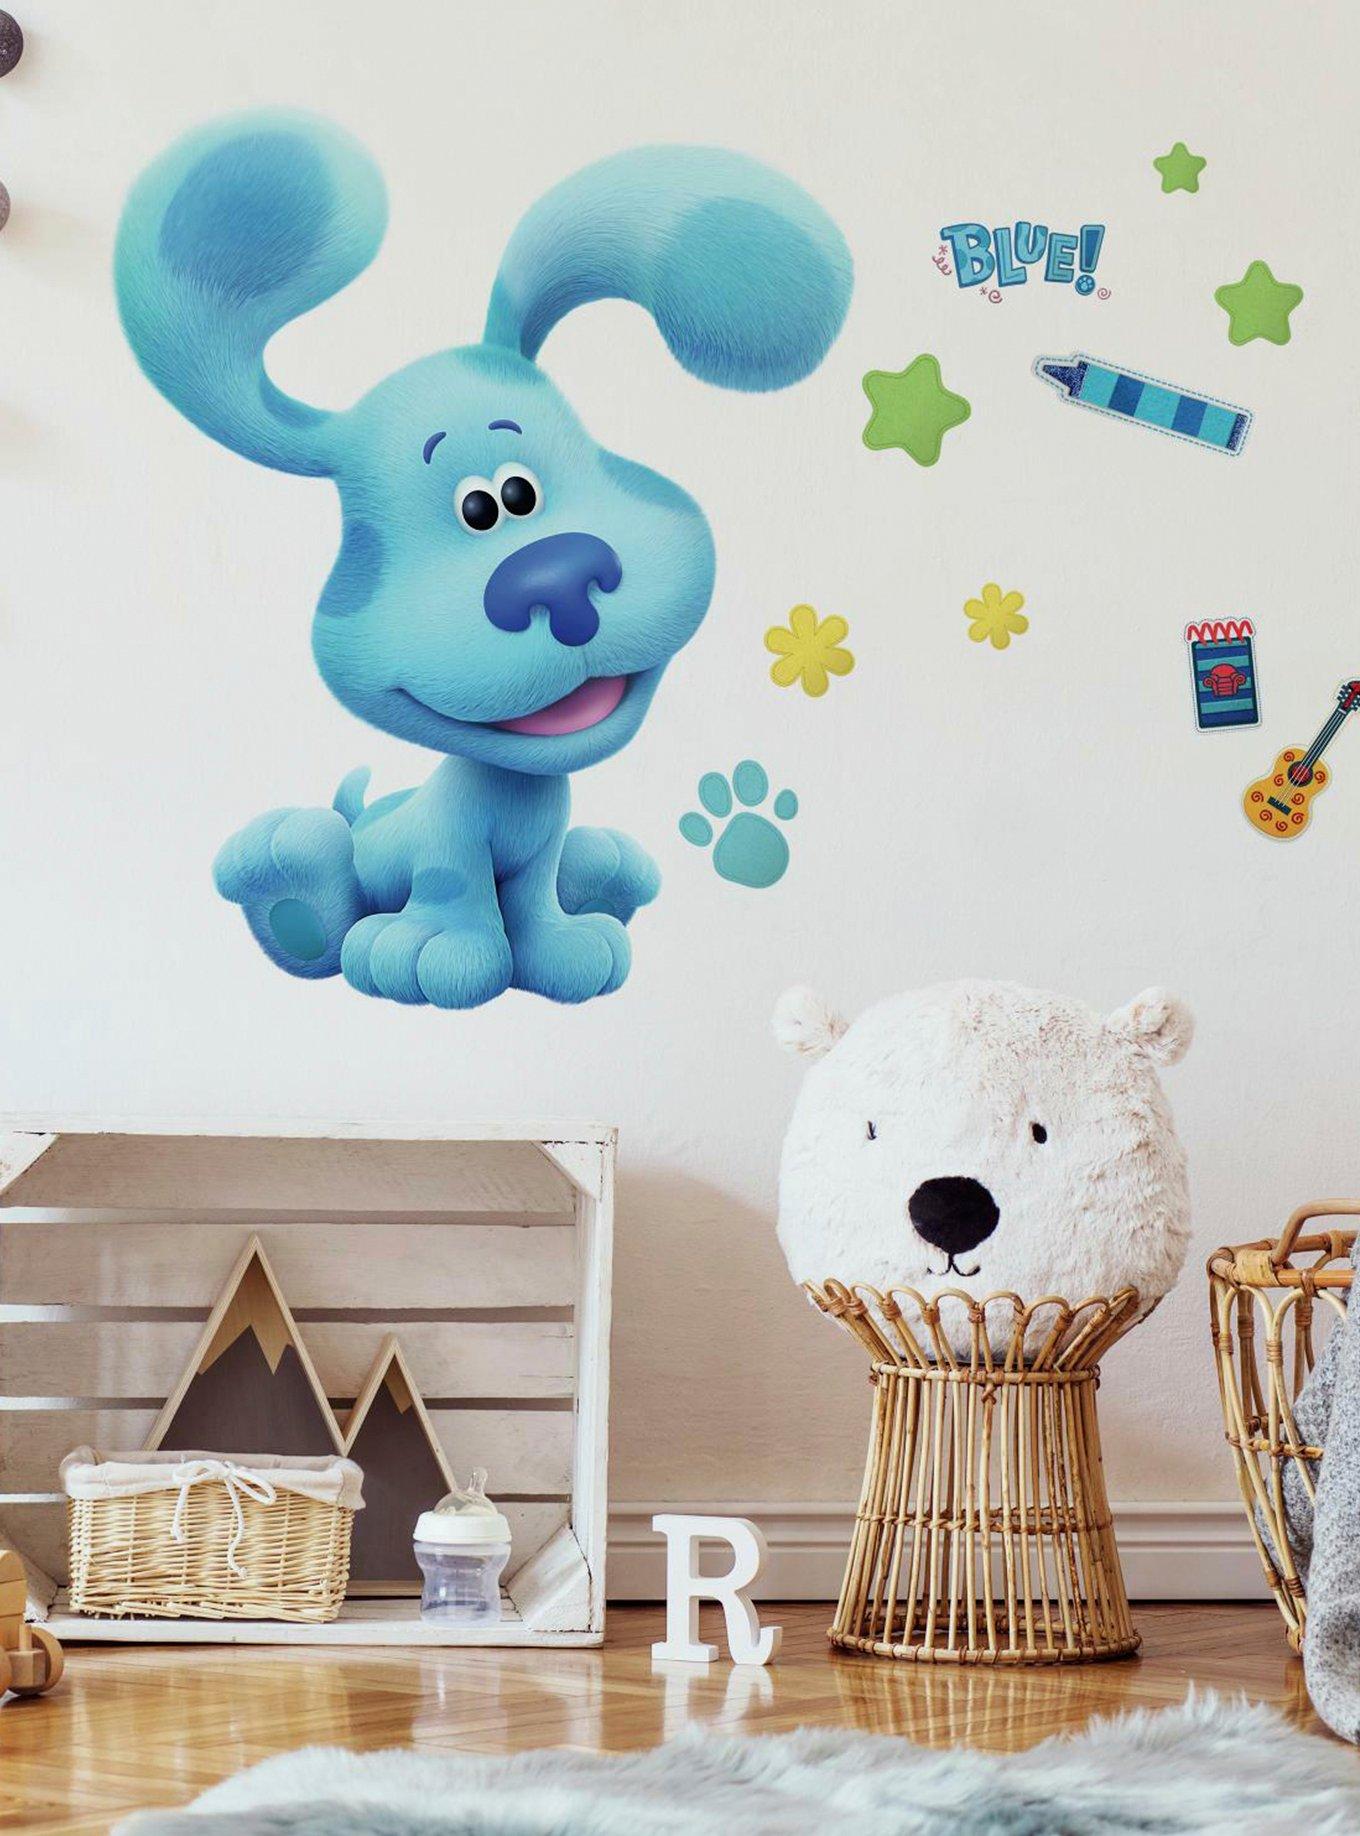 Nickelodeon Blue's Clues Peel & Stick Giant Wall Decals | Hot Topic